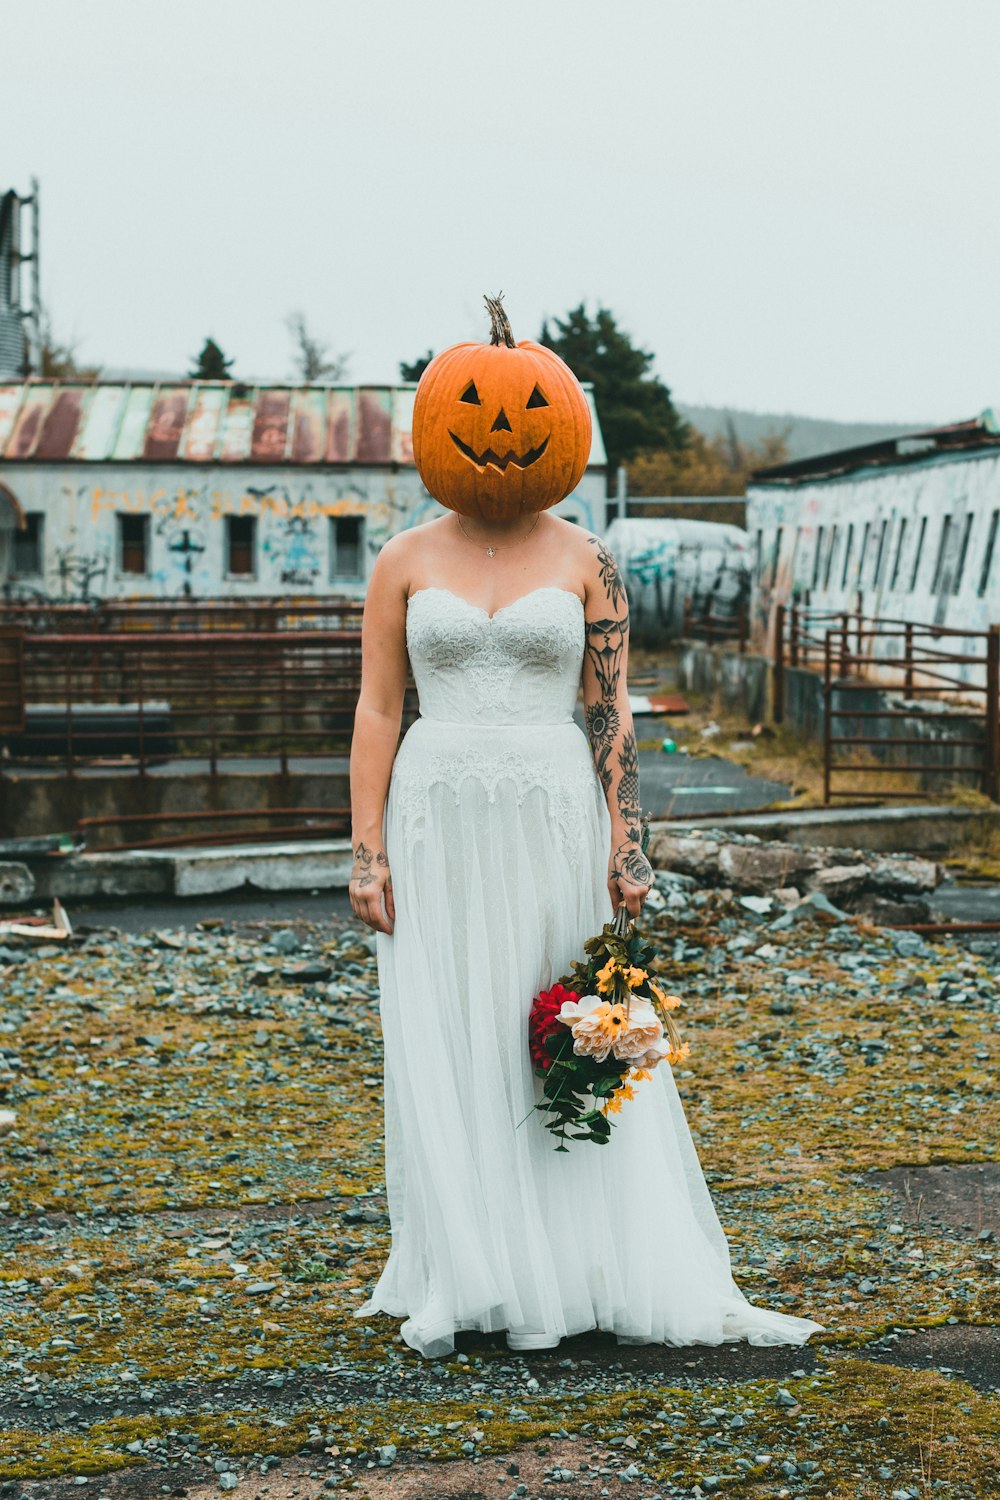 a woman in a white dress with a pumpkin on her head